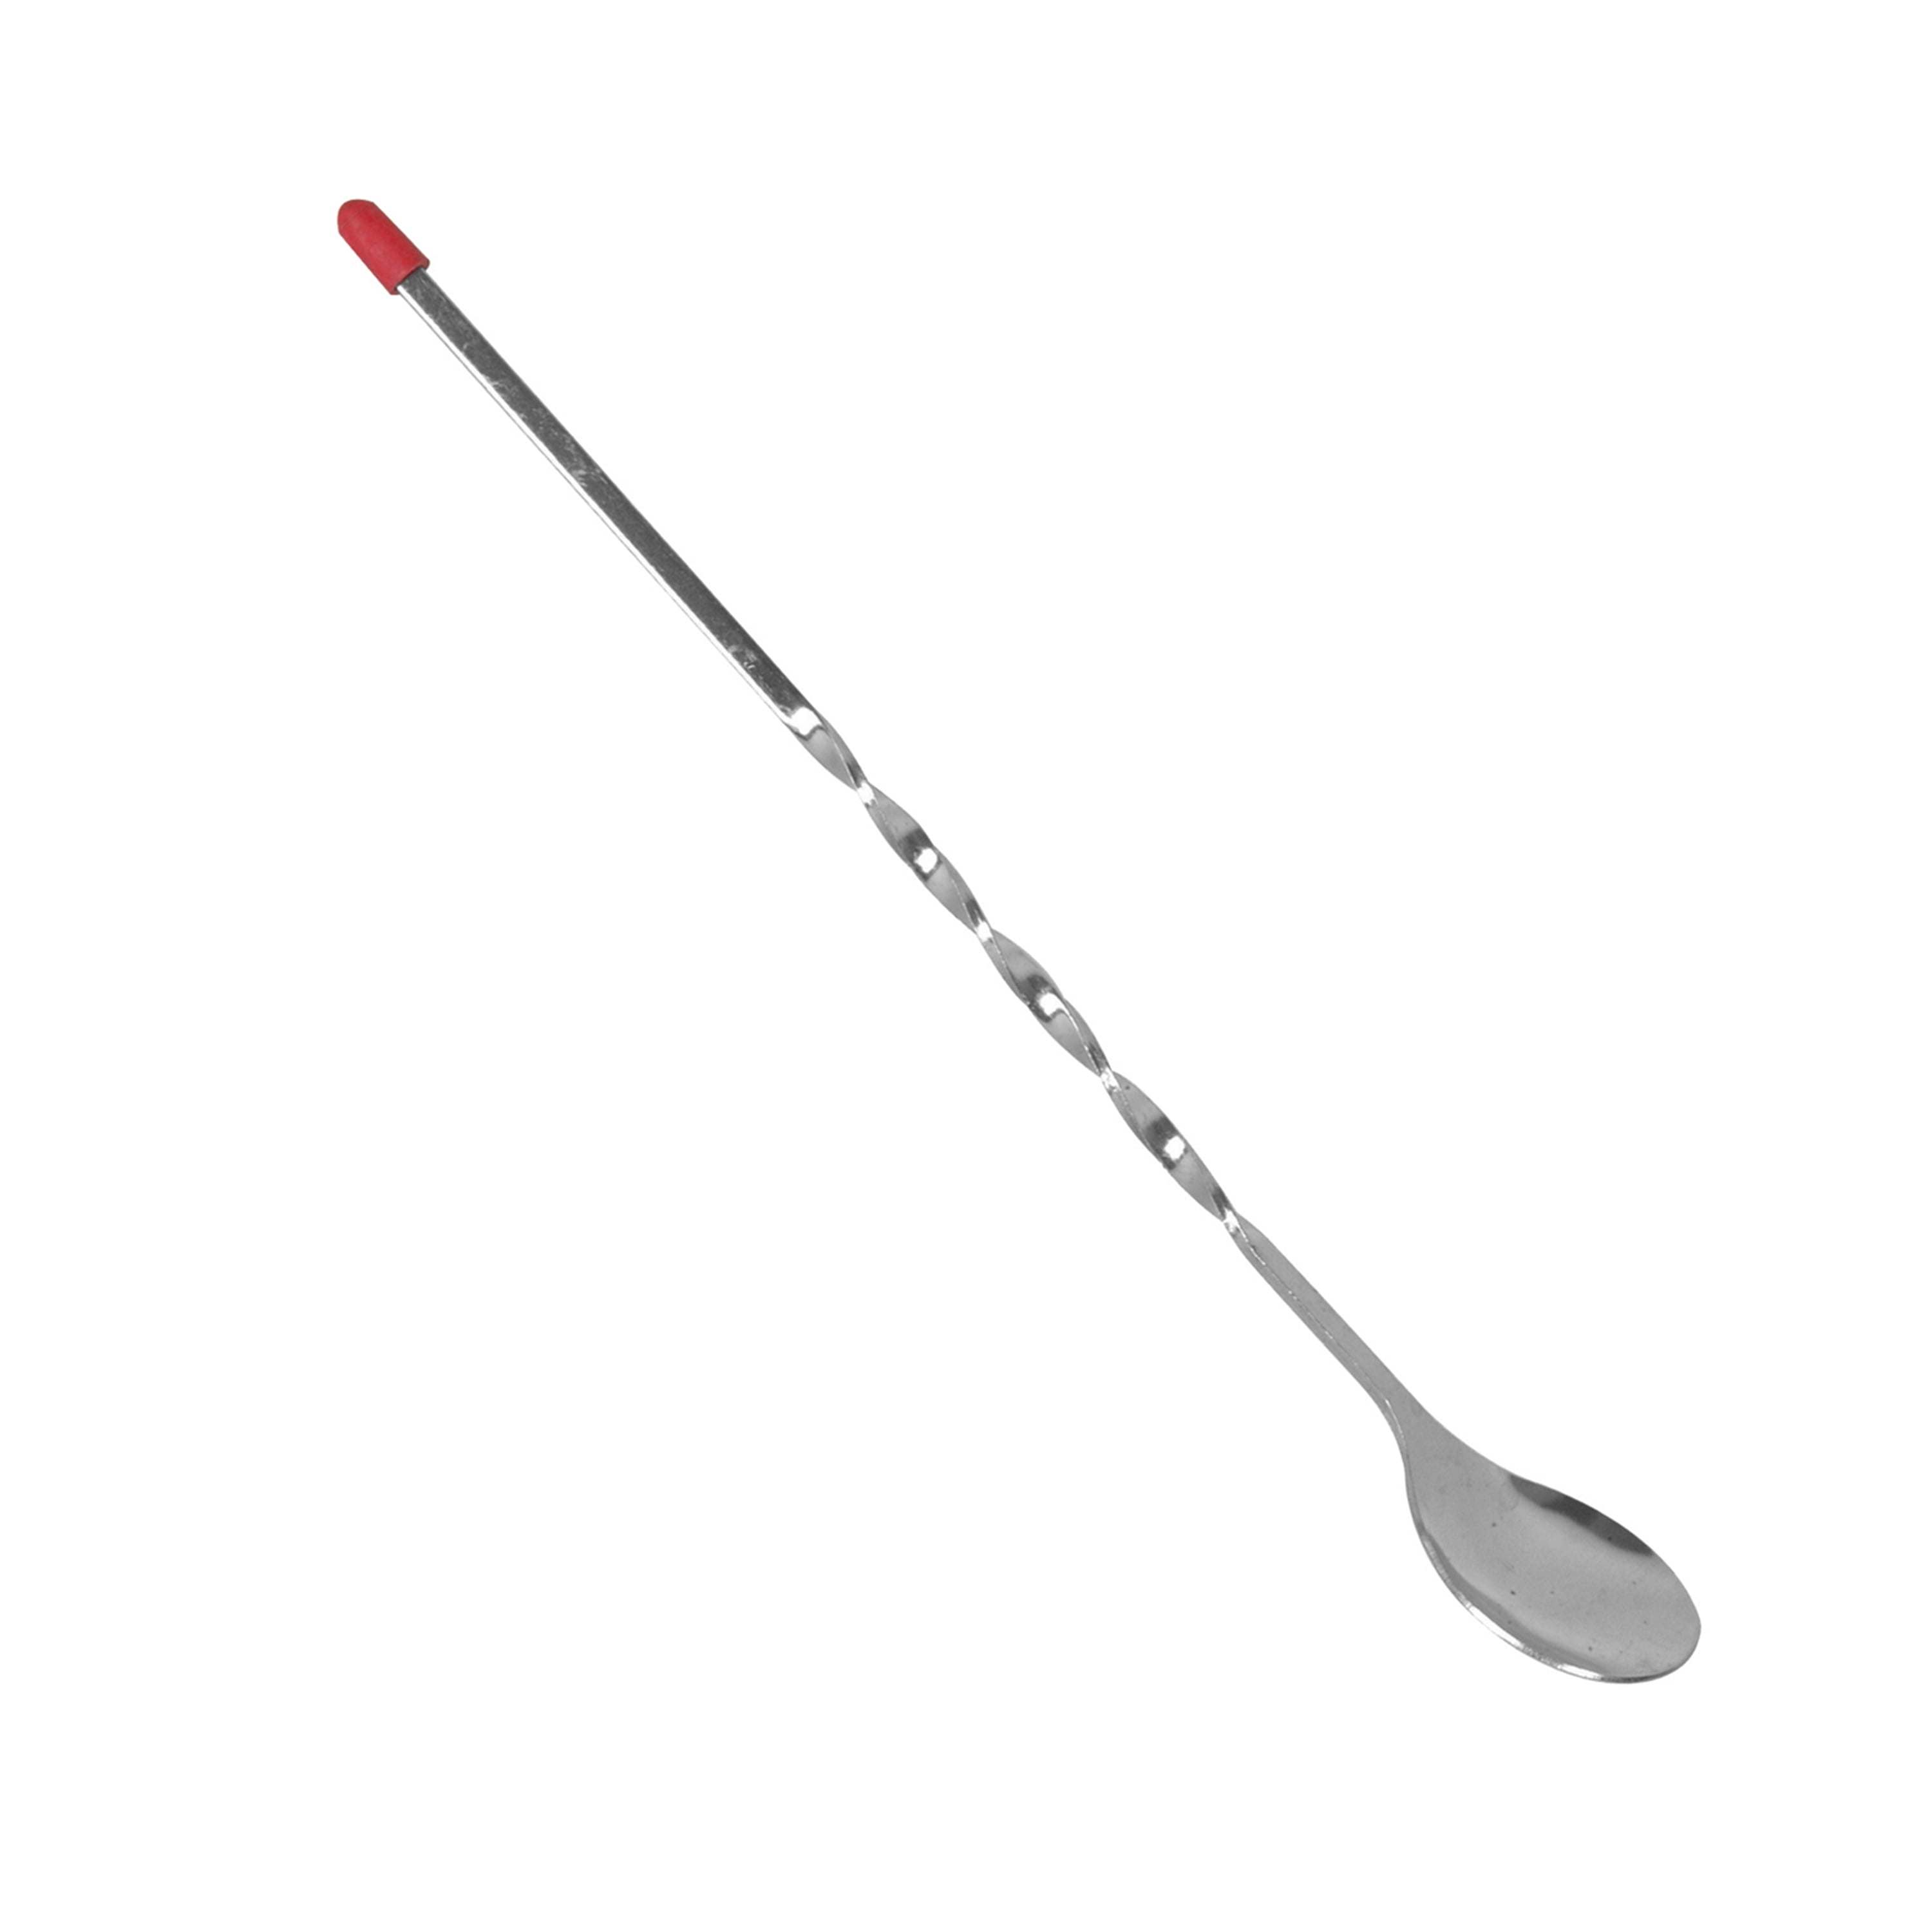 Chef World 11 Inch Stainless Steel Deluxe Cocktail Mixing Bar Spoon with Red Knob 